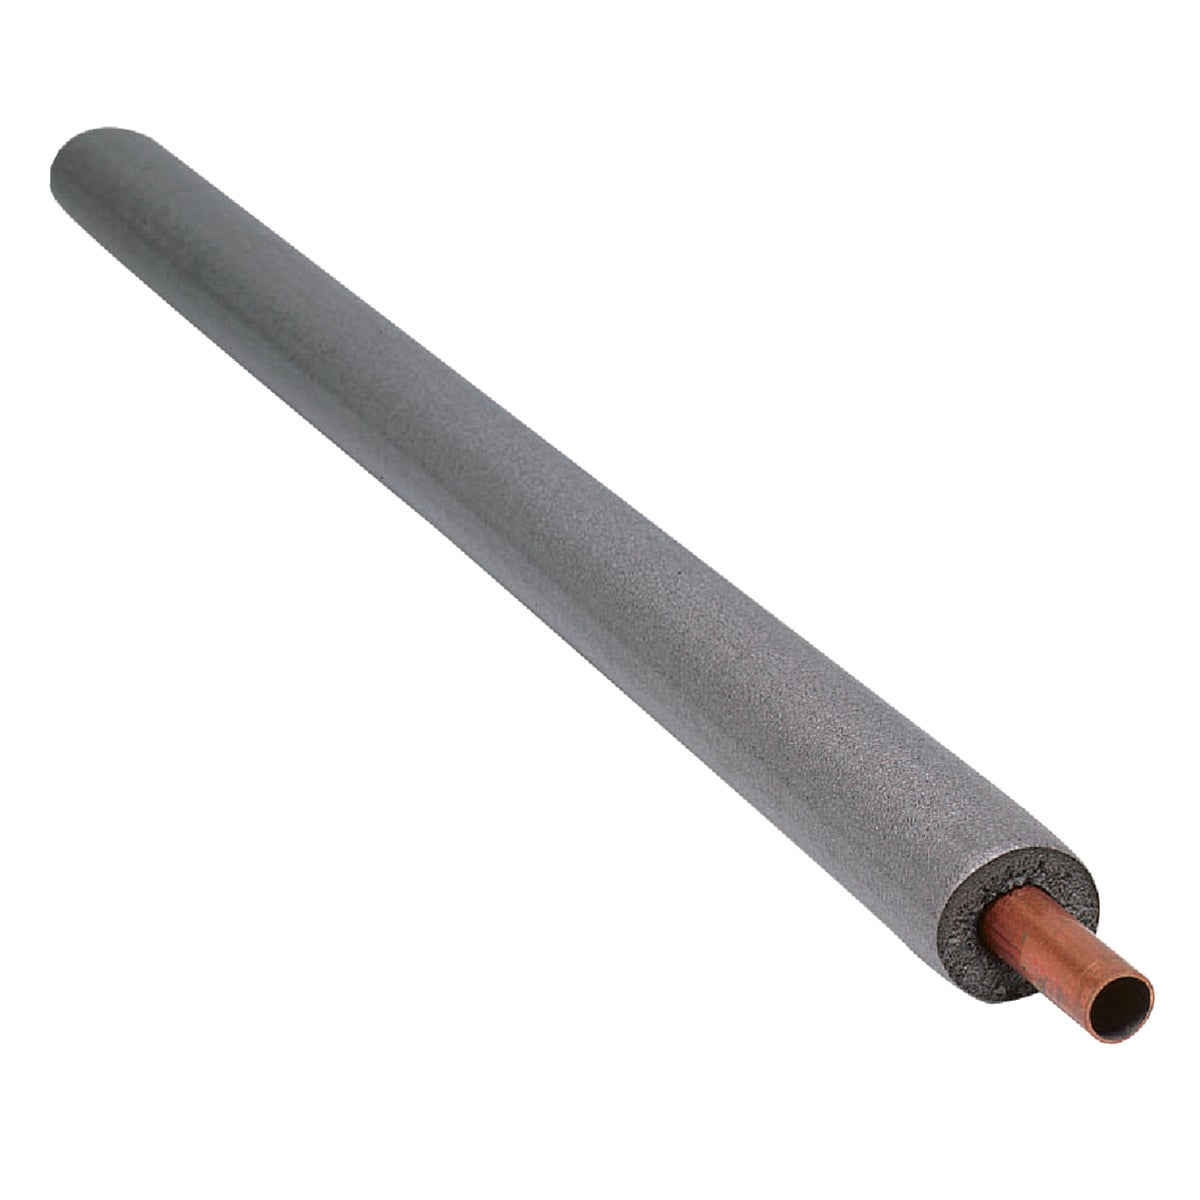 Tundra 1/2 In. Wall Semi-Slit Polyethylene Pipe Insulation Wrap, 1/2 In. x 6 Ft. Fits Pipe Size 1/2 In. Copper / 3/8 In. Iron